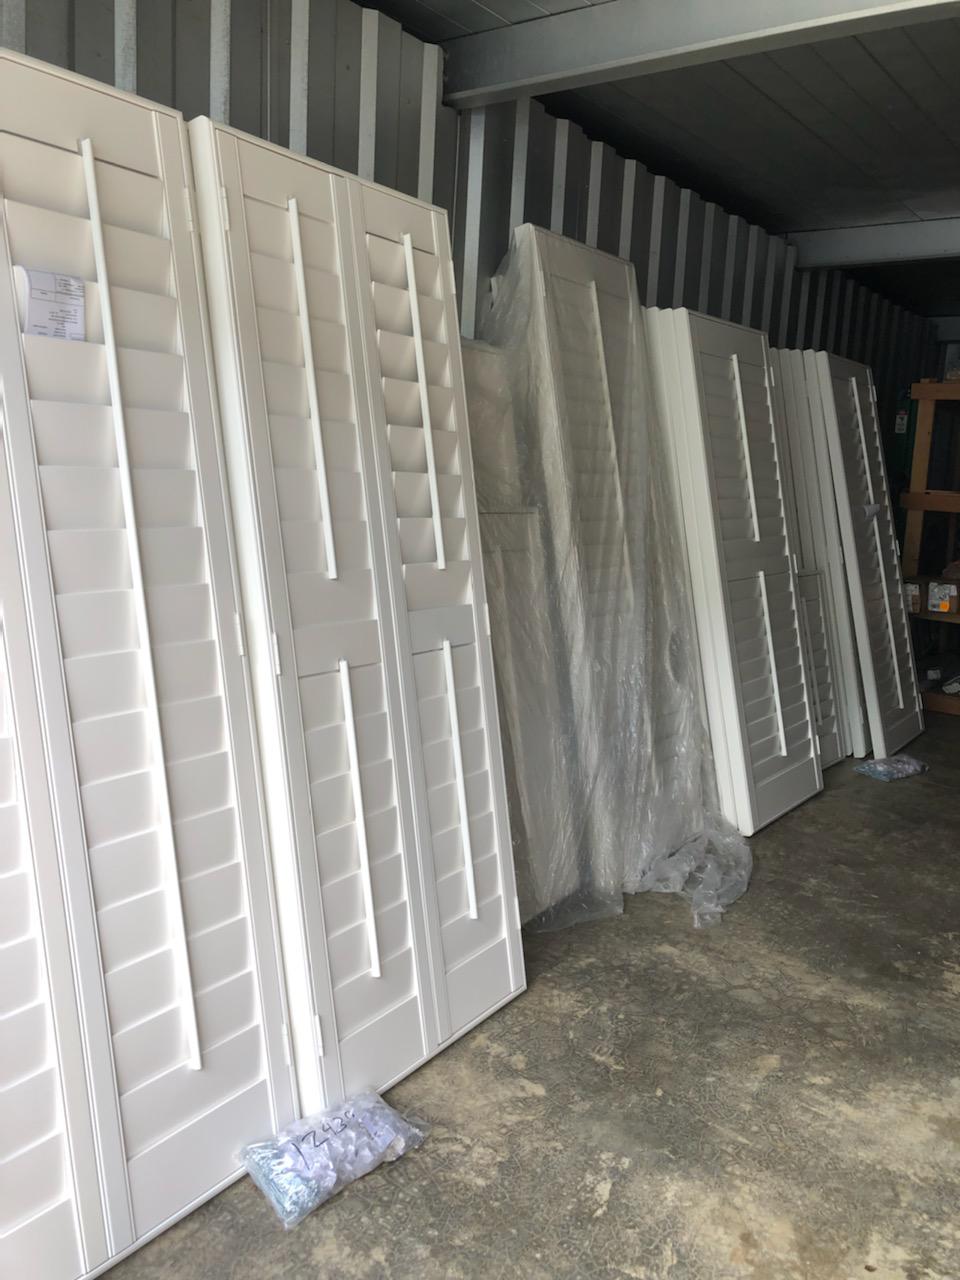 Just look at all these Wood Shutters ready to go! Someone in Acworth is going to love their new look once these babies are installed!